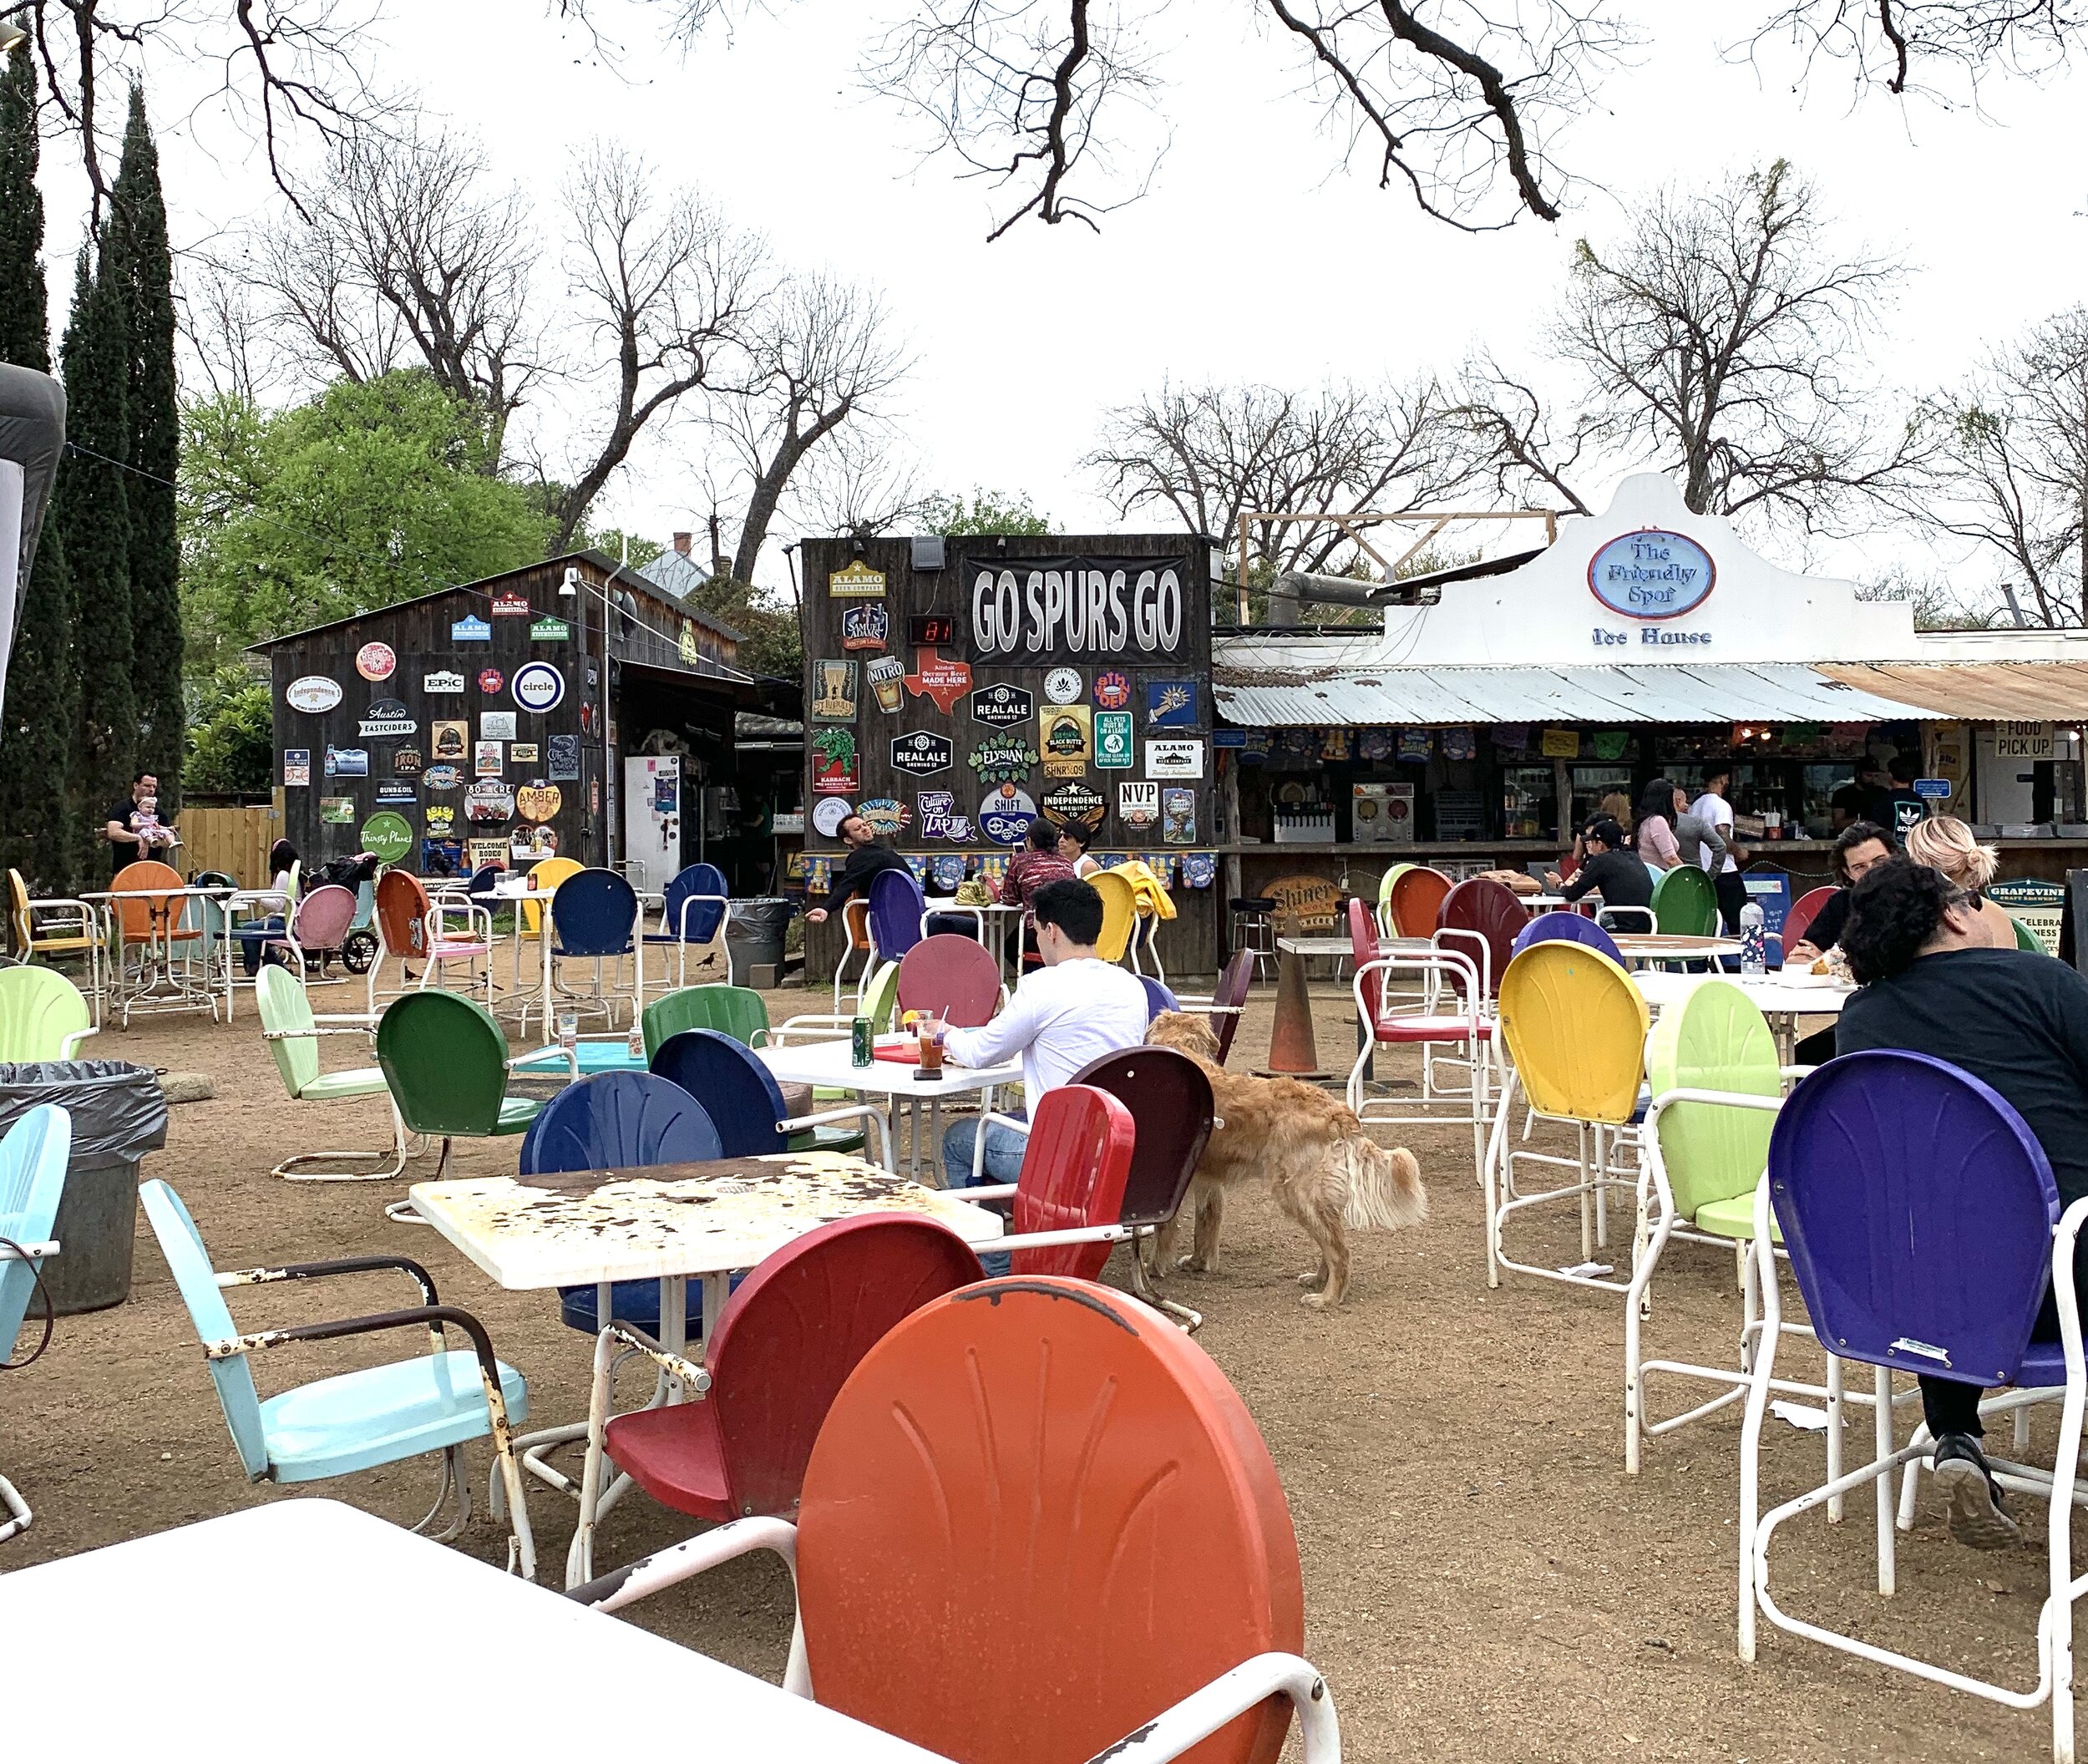  On our bike tour, we discovered this fun and colorful outdoor place— The Friendly Spot  that played country music in the front and Mexican music in the back courtyard.  